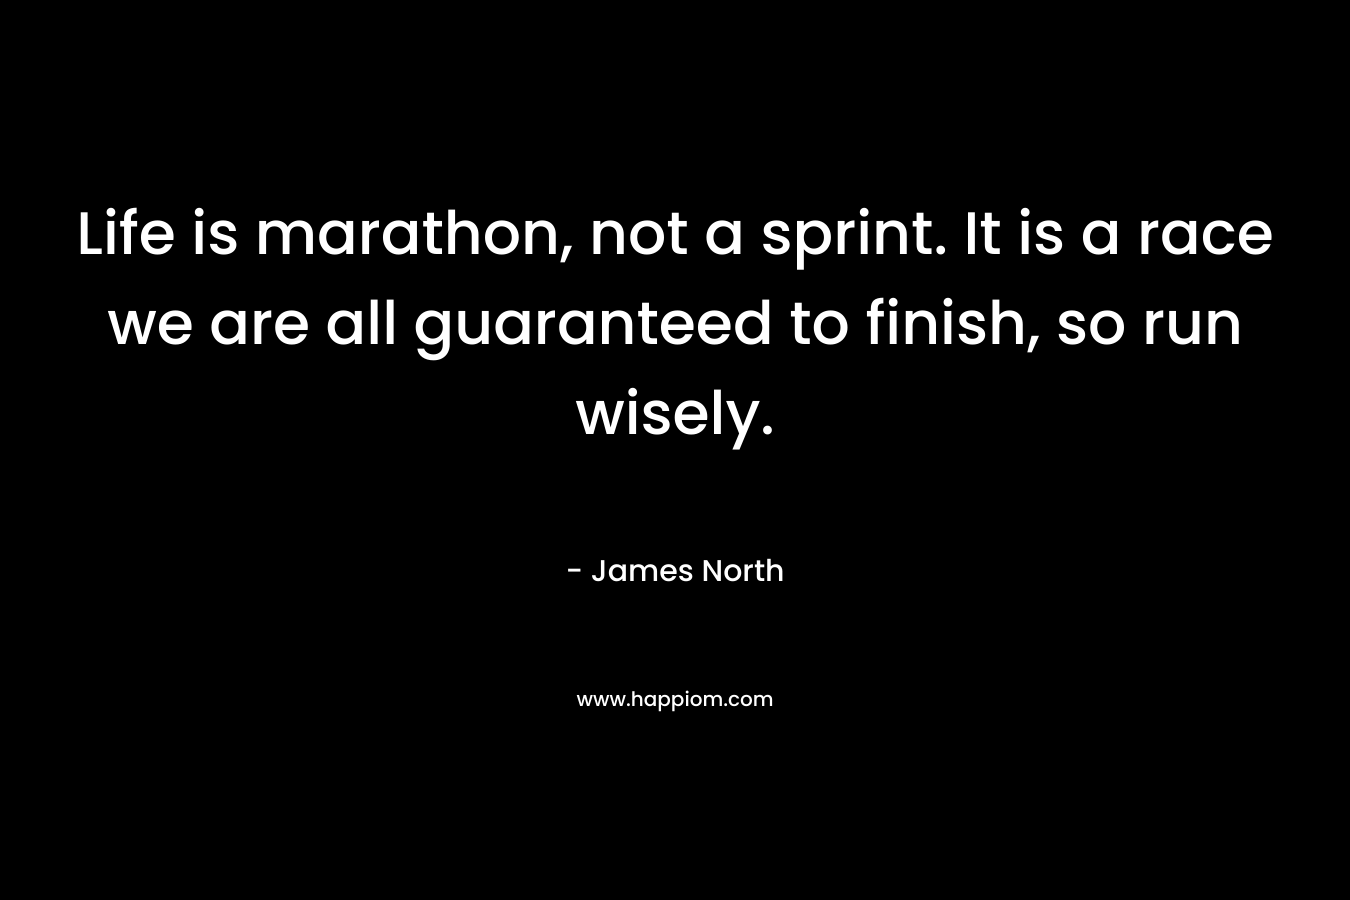 Life is marathon, not a sprint. It is a race we are all guaranteed to finish, so run wisely. – James North